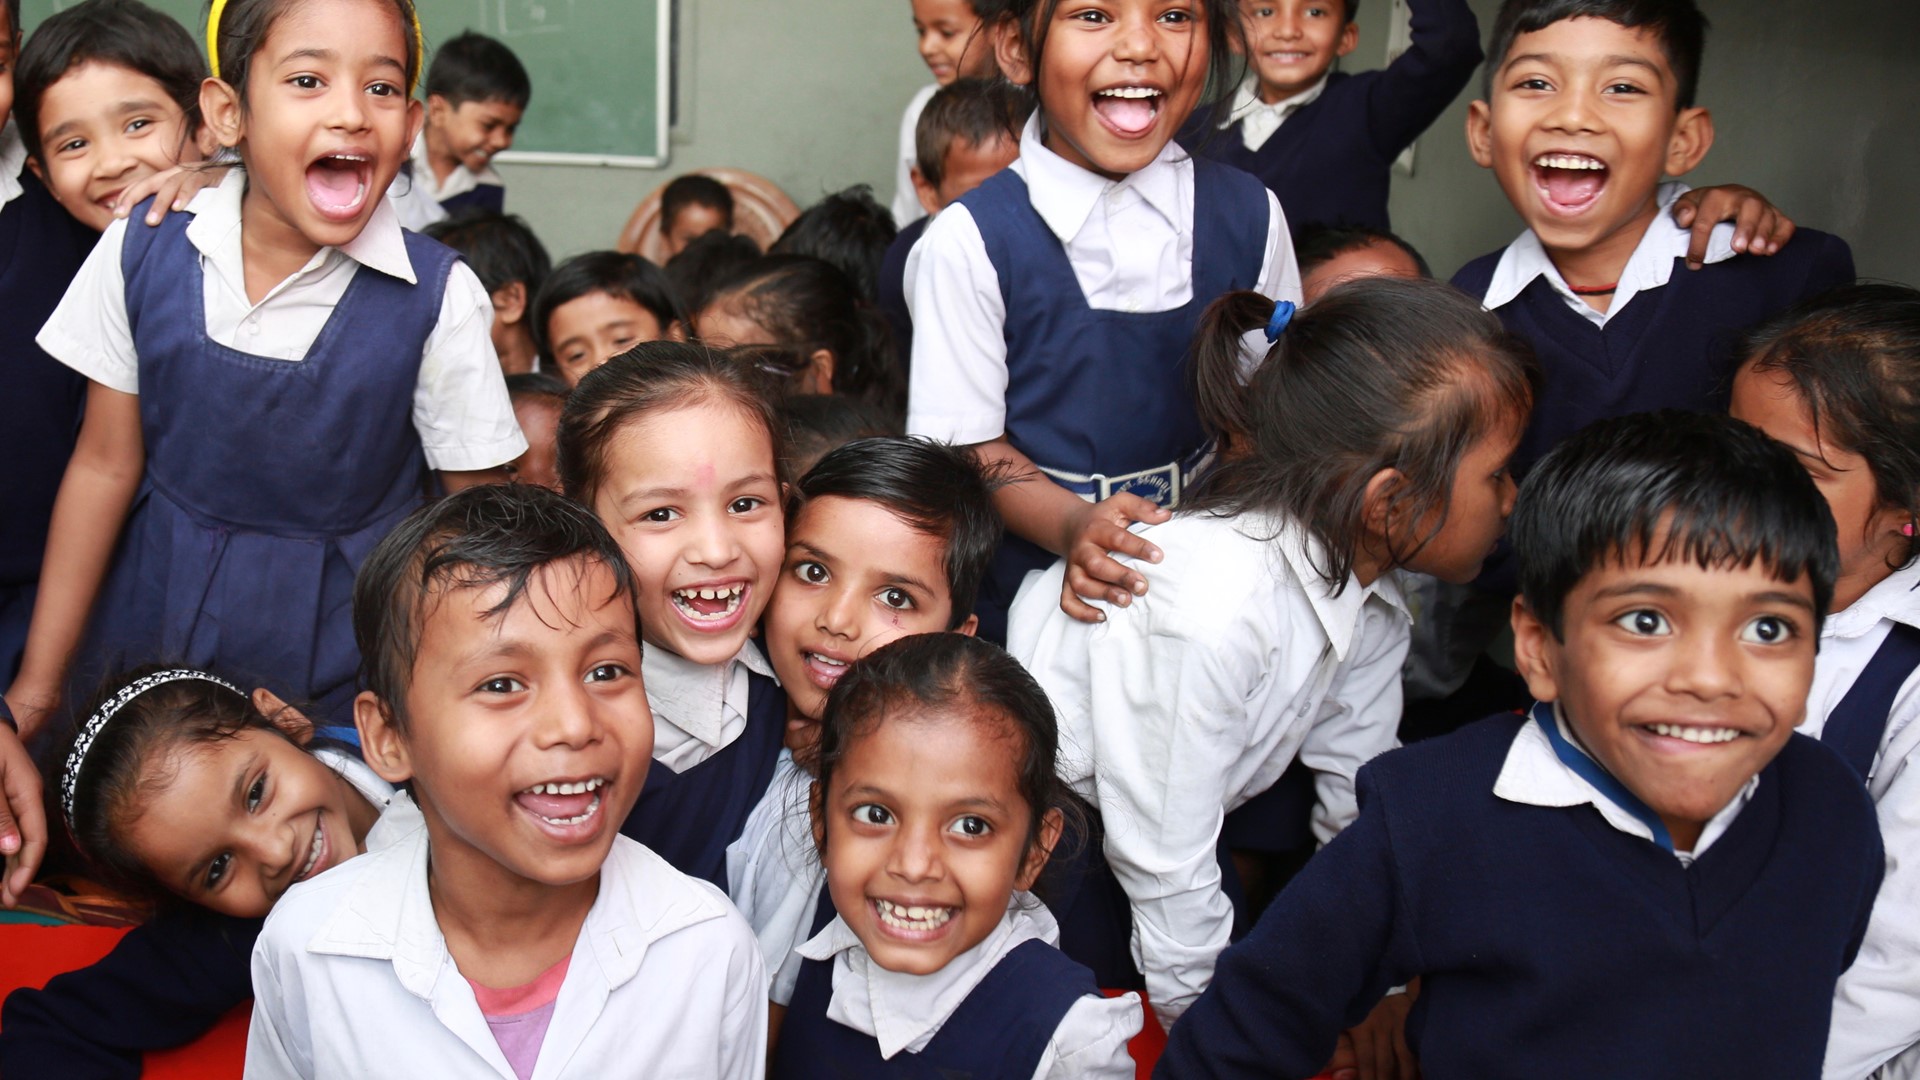 School children in India benefitting from one of the educational projects supported by CNH Industrial